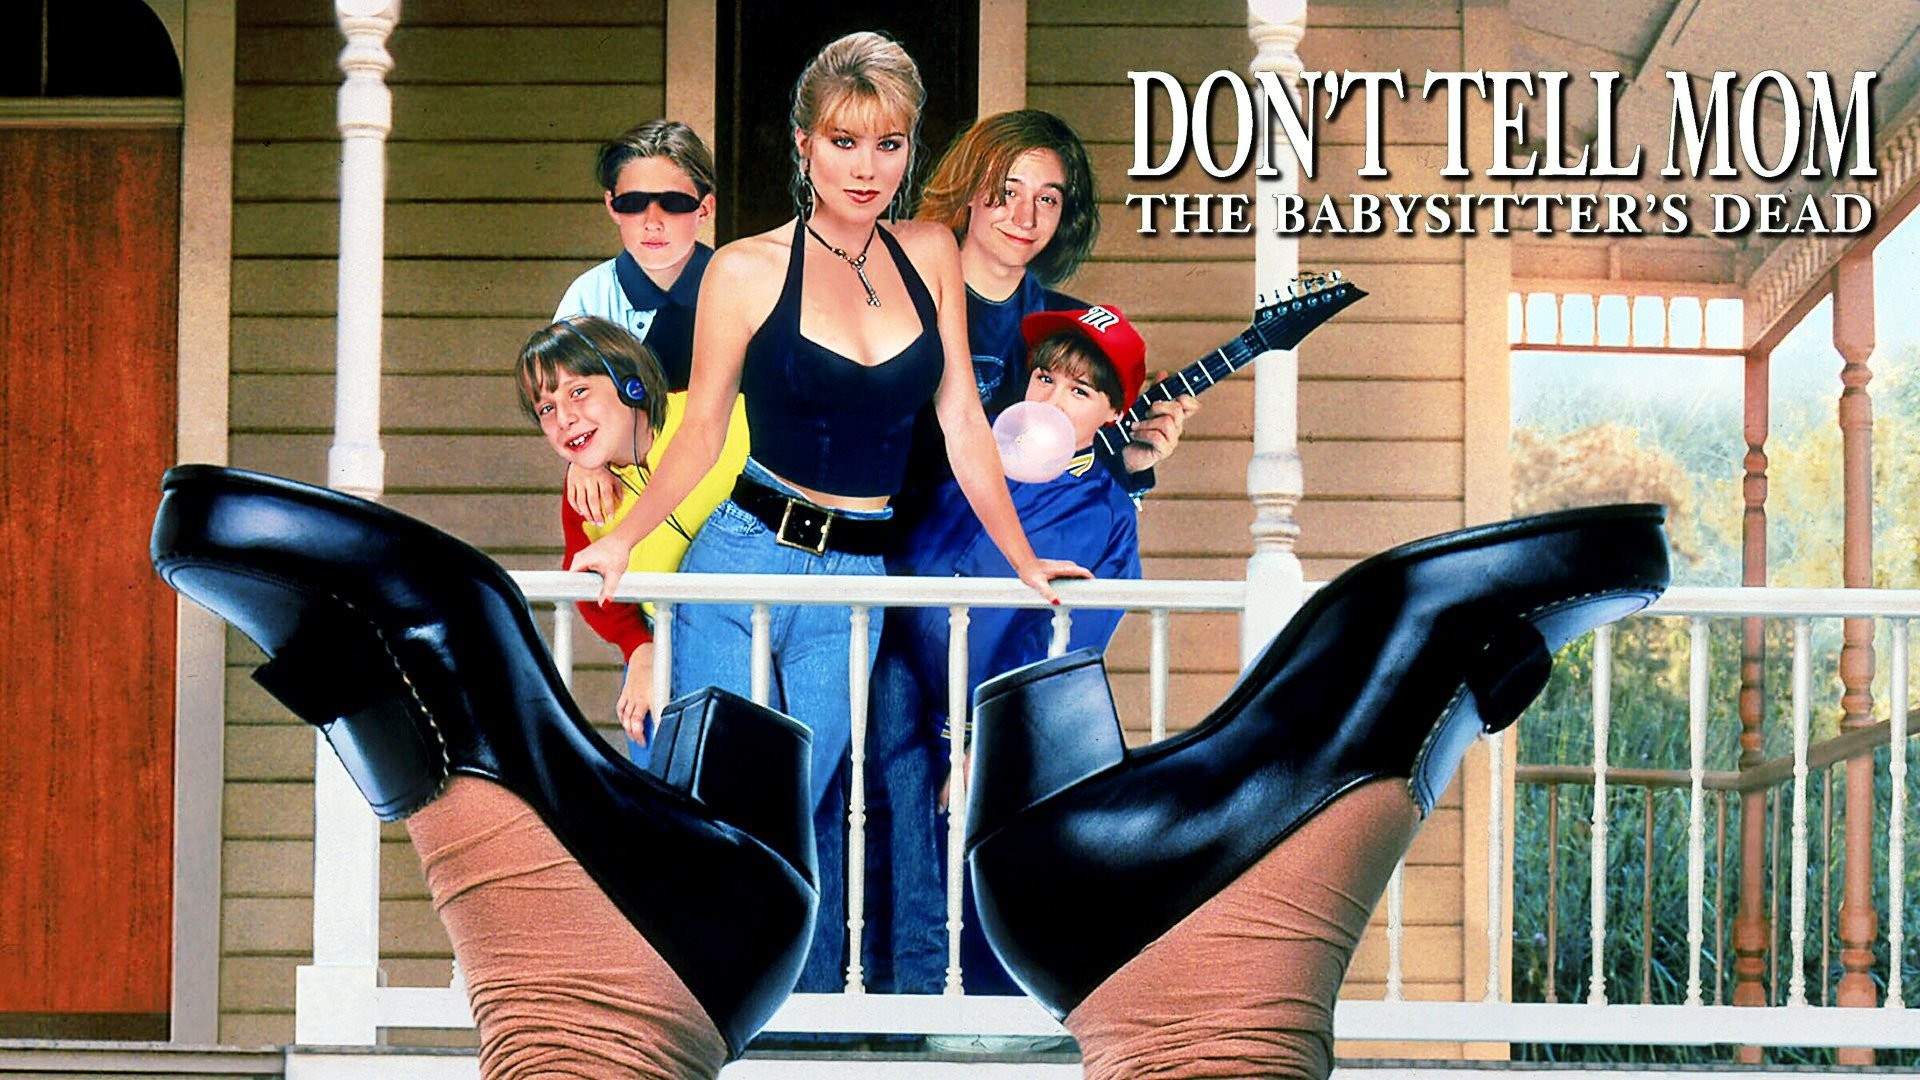 39-facts-about-the-movie-dont-tell-mom-the-babysitters-dead